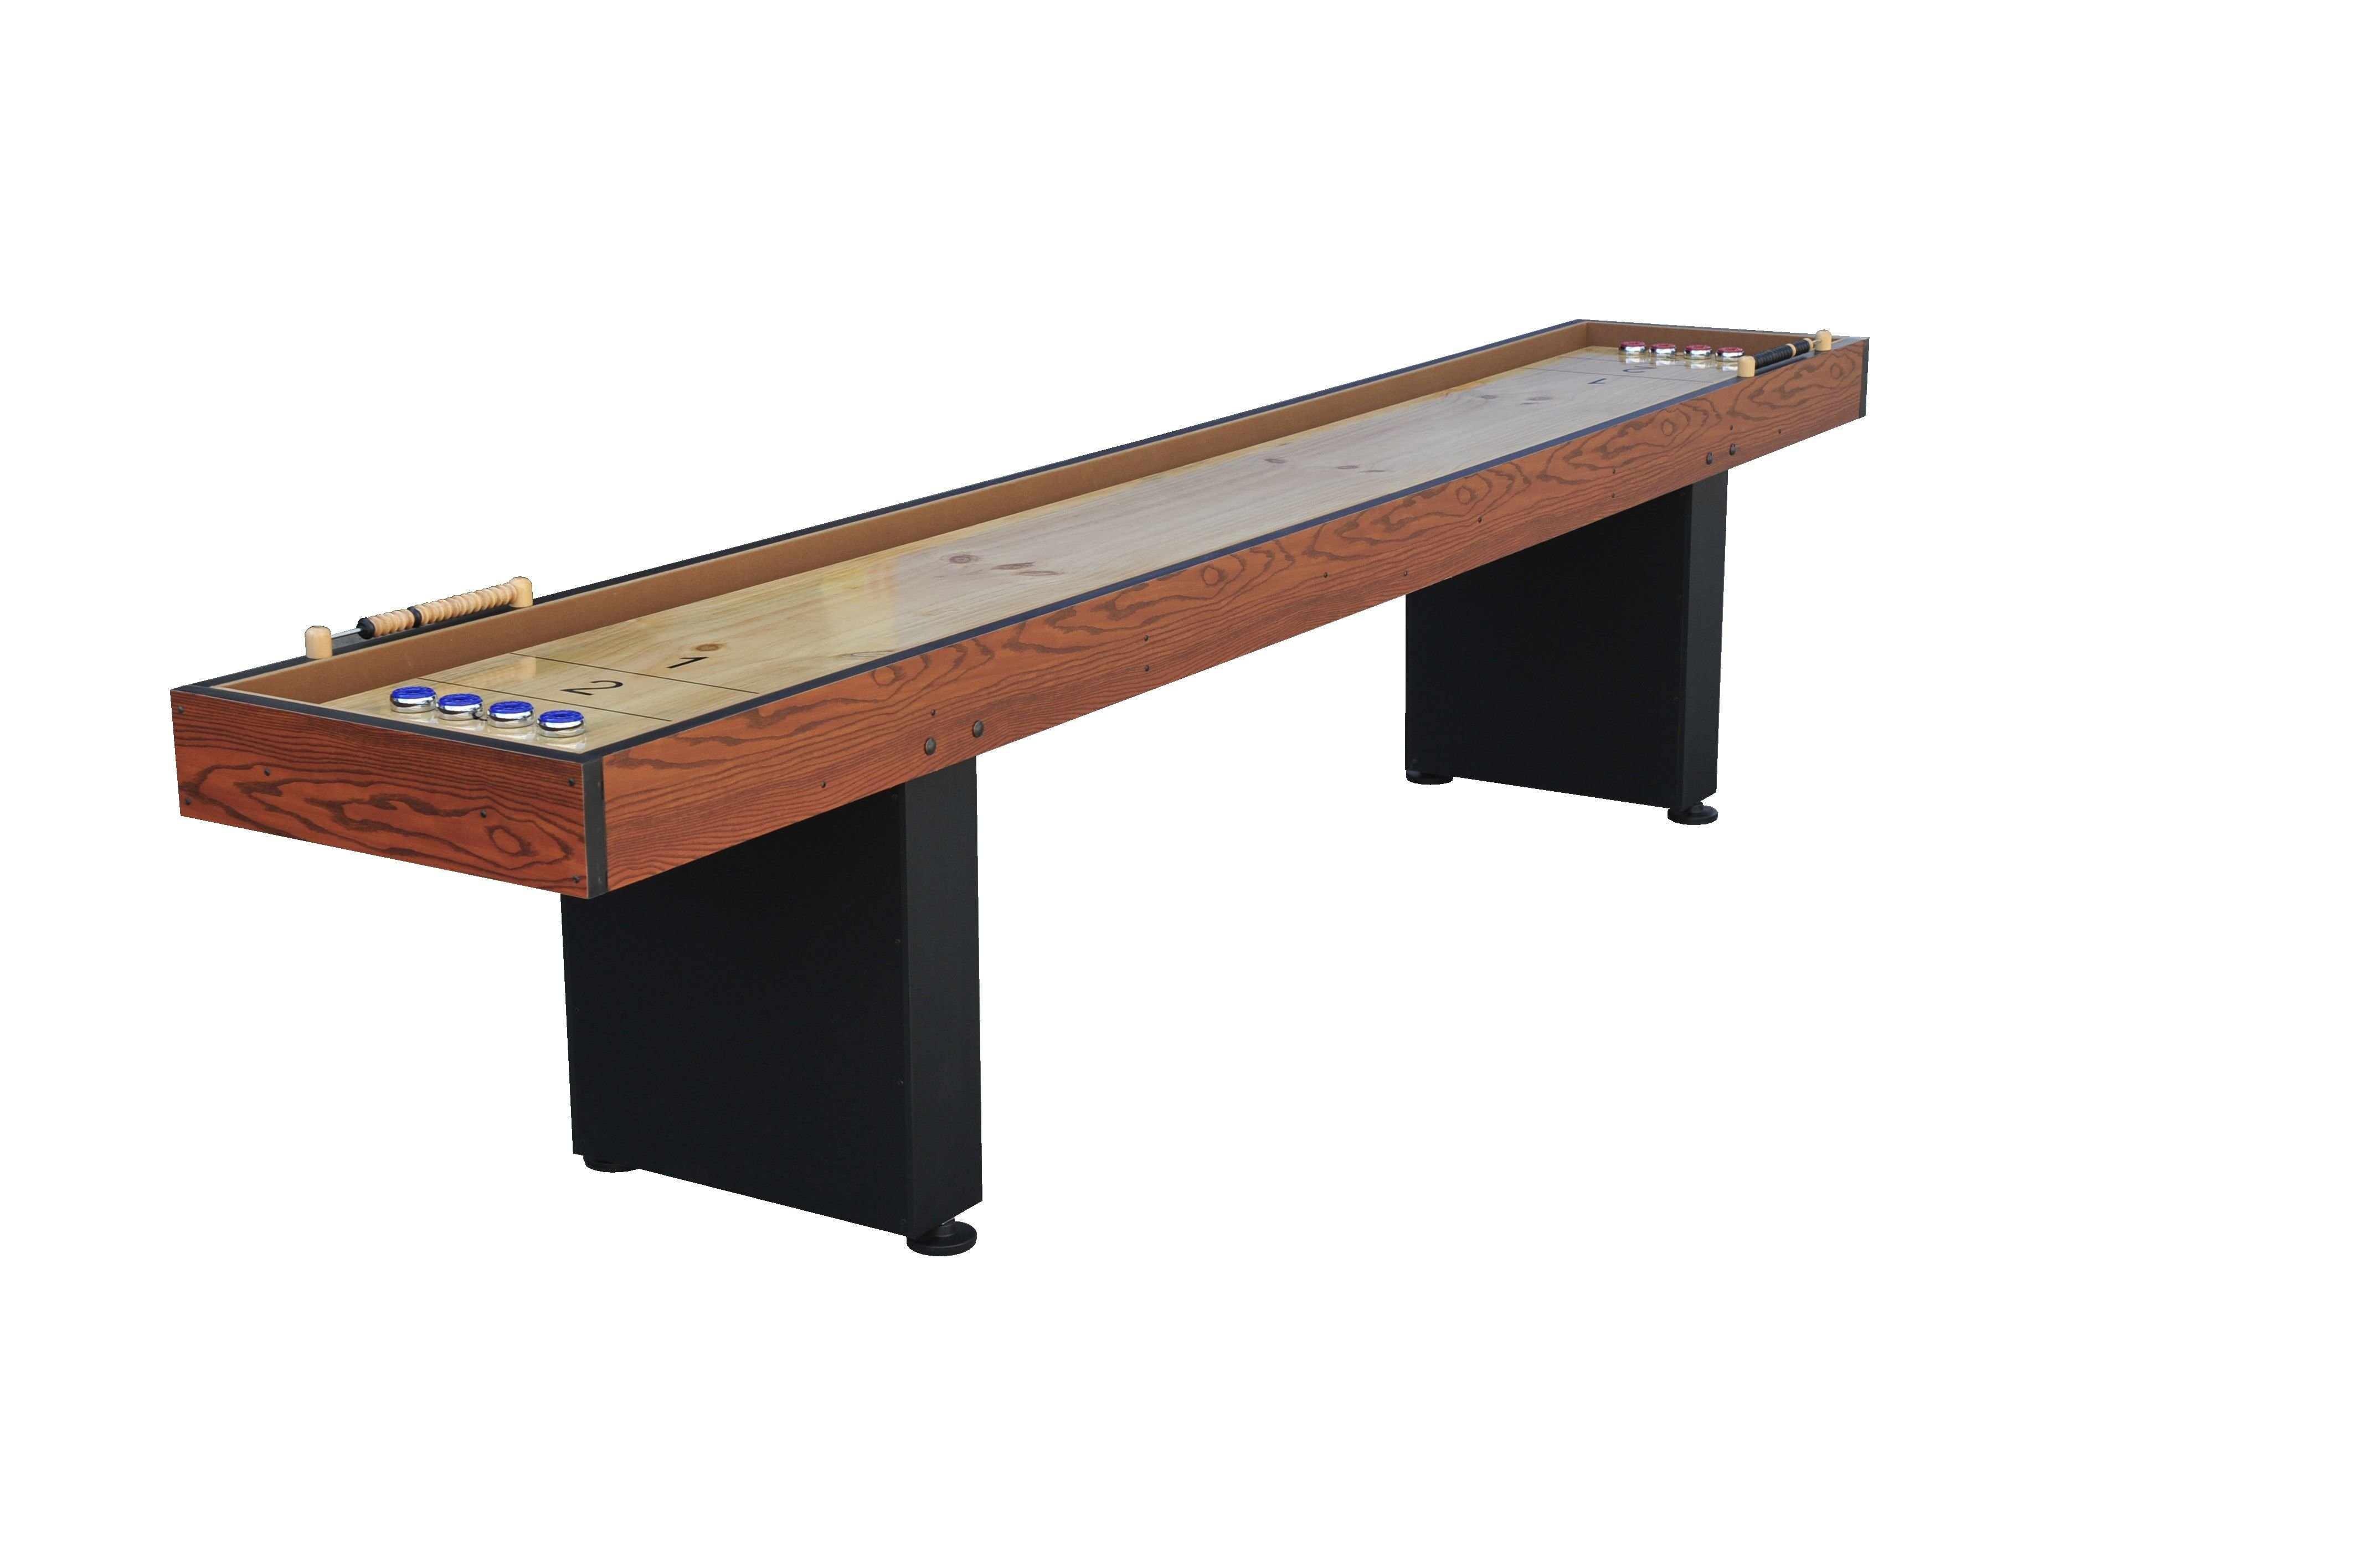 Airzone Play 12 Shuffleboard Table Wayfair intended for size 4256 X 2832